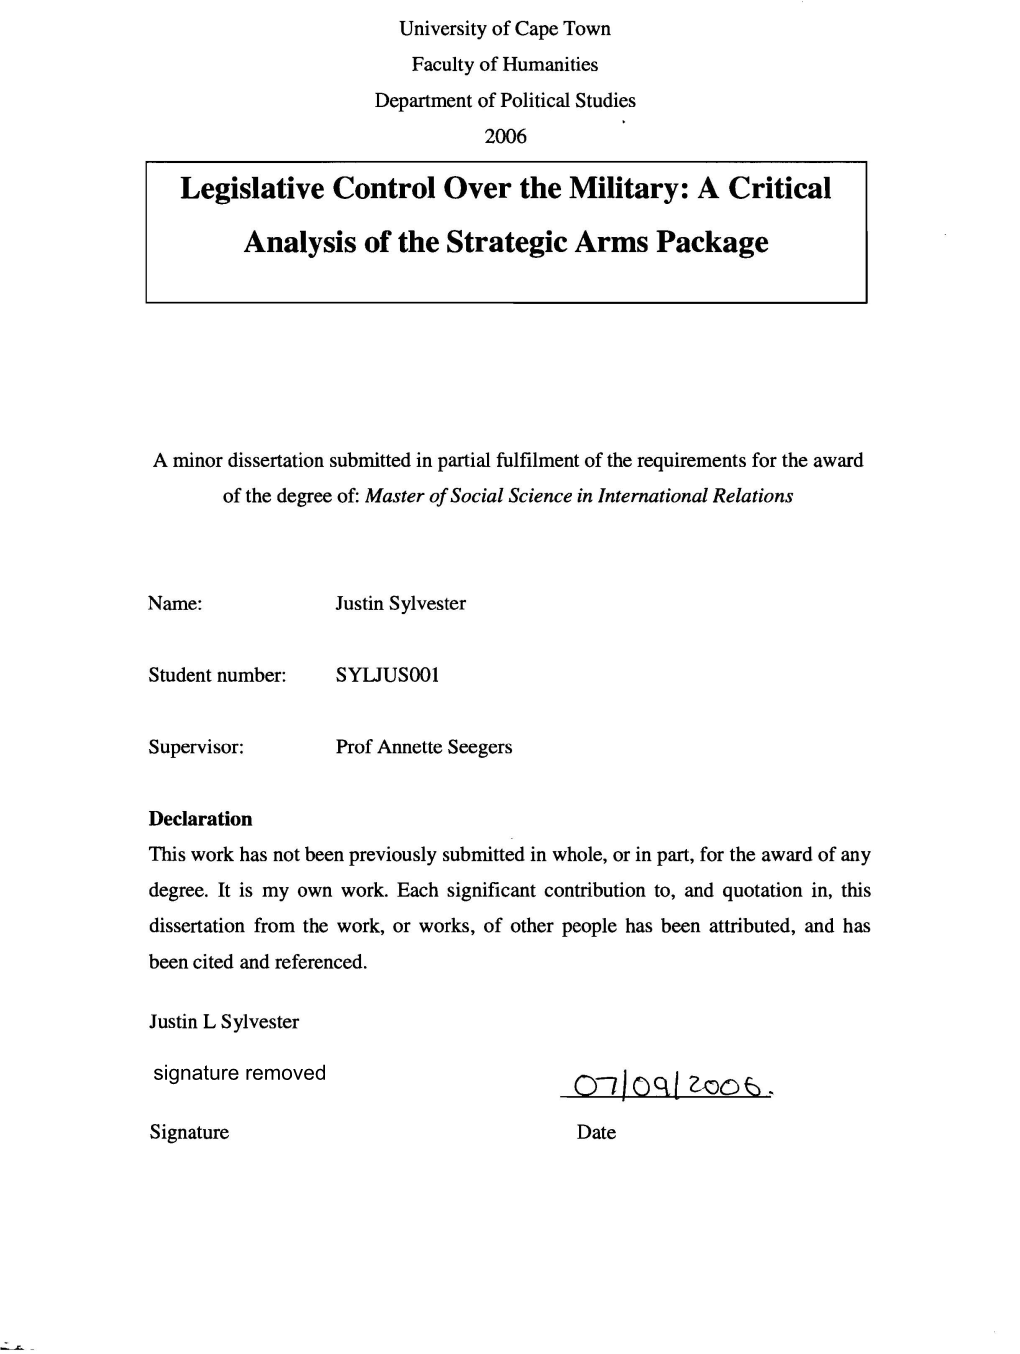 Legislative Control Over the Military: a Critical Analysis of the Strategic Arms Package